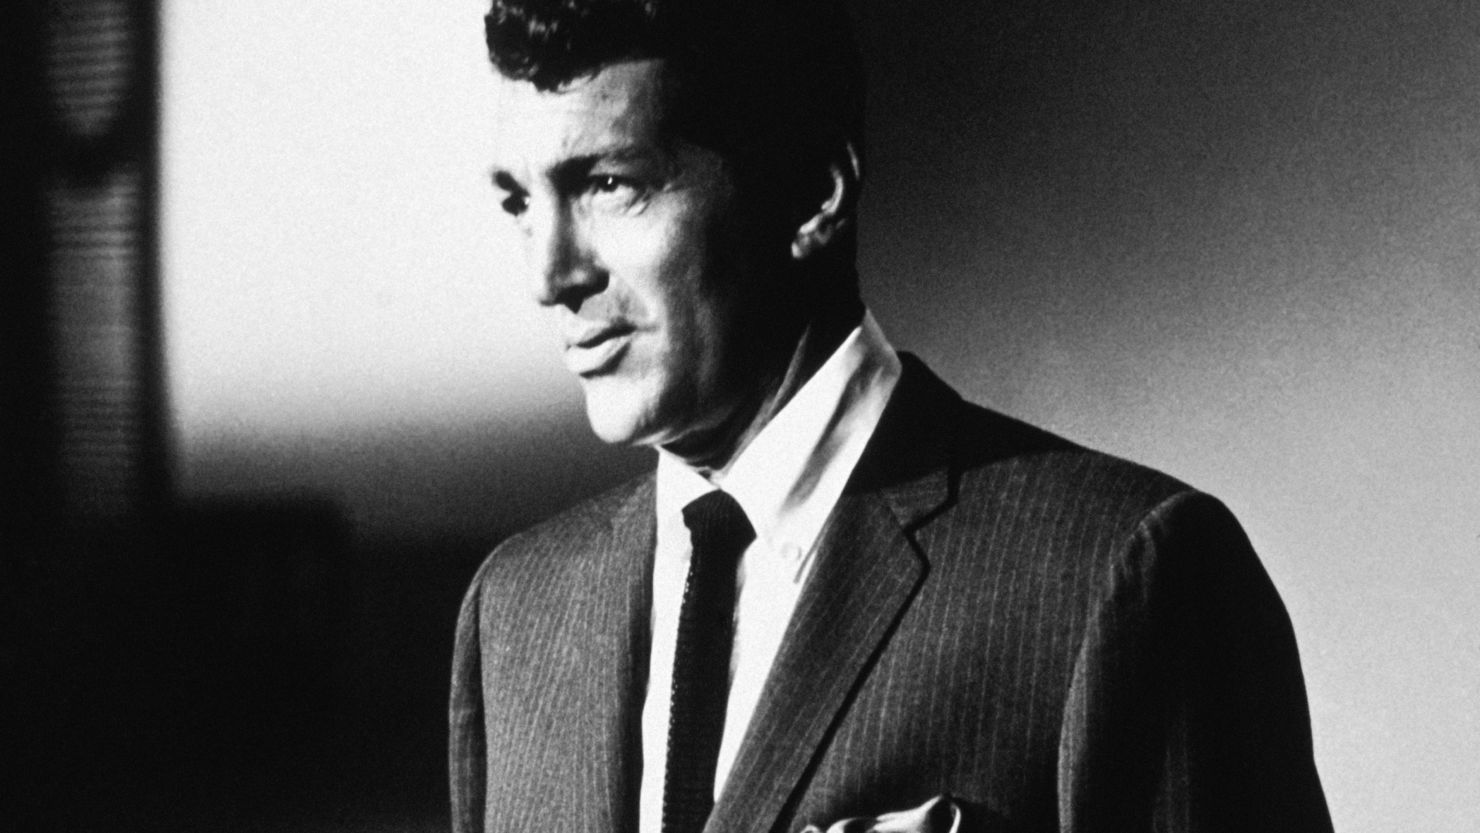 Years after his death, Dean Martin's relaxing singing voice is still a presence on TV, in shopping malls and restaurants.